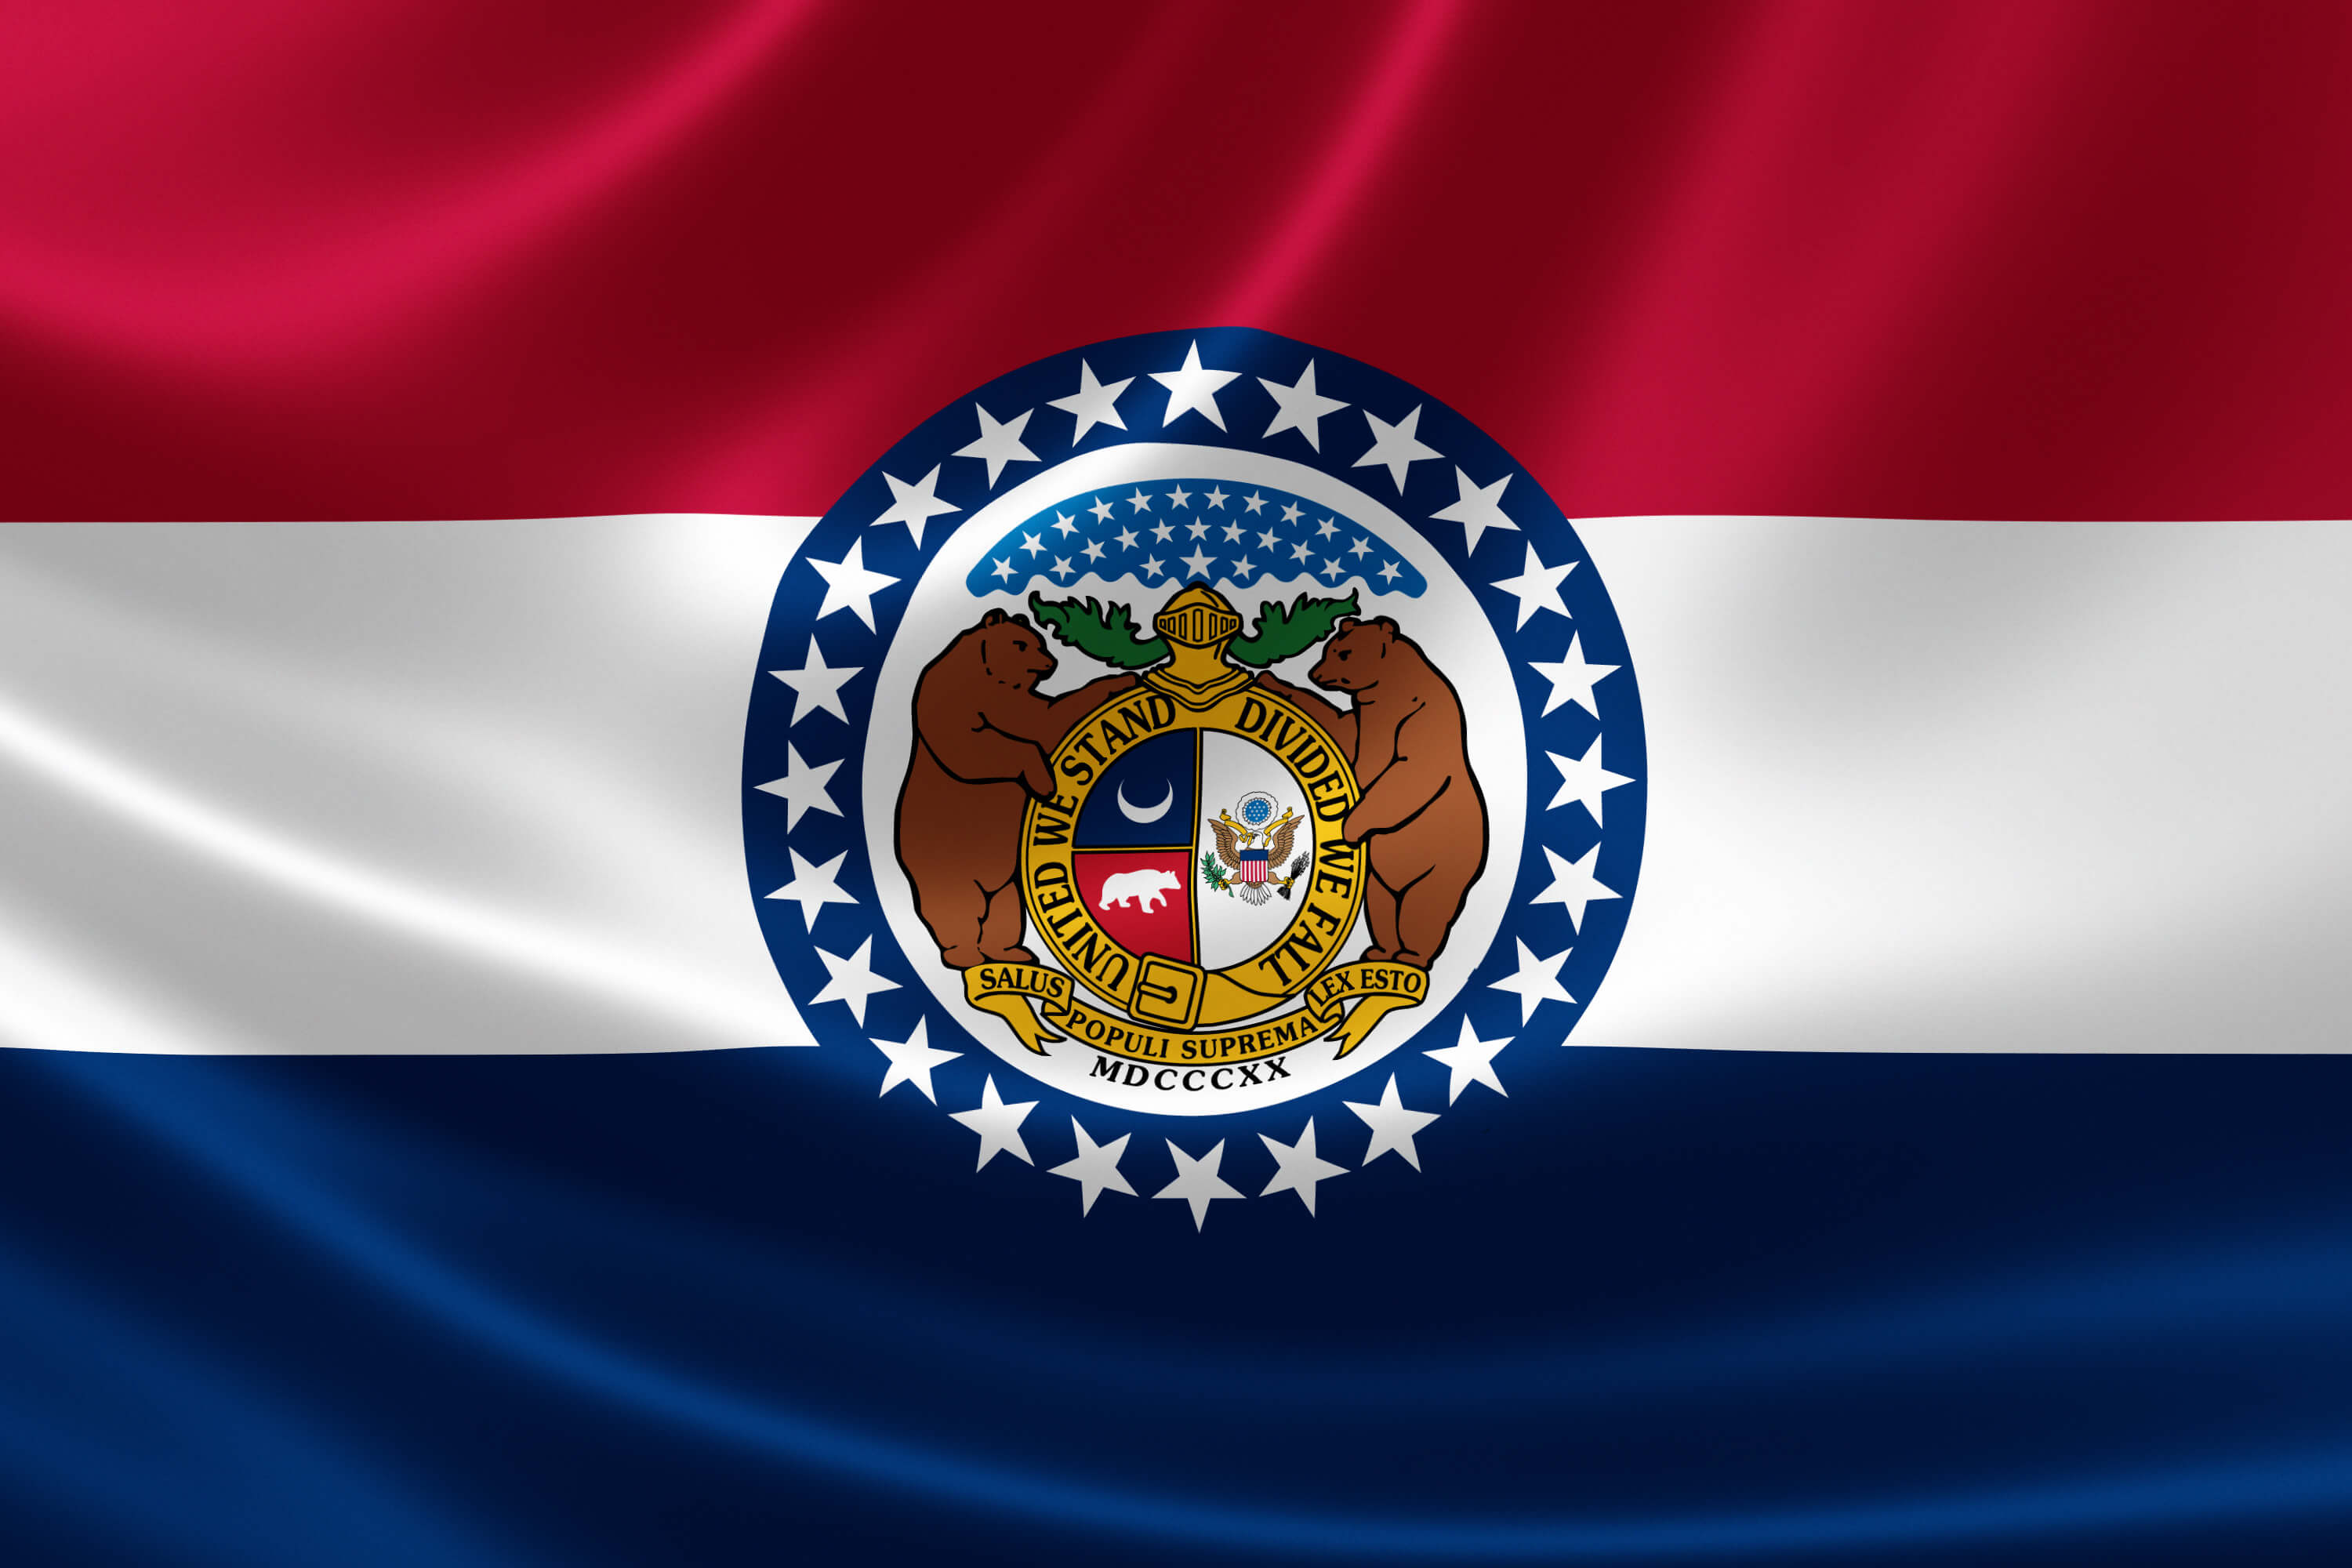 An image of Missouri state flag.